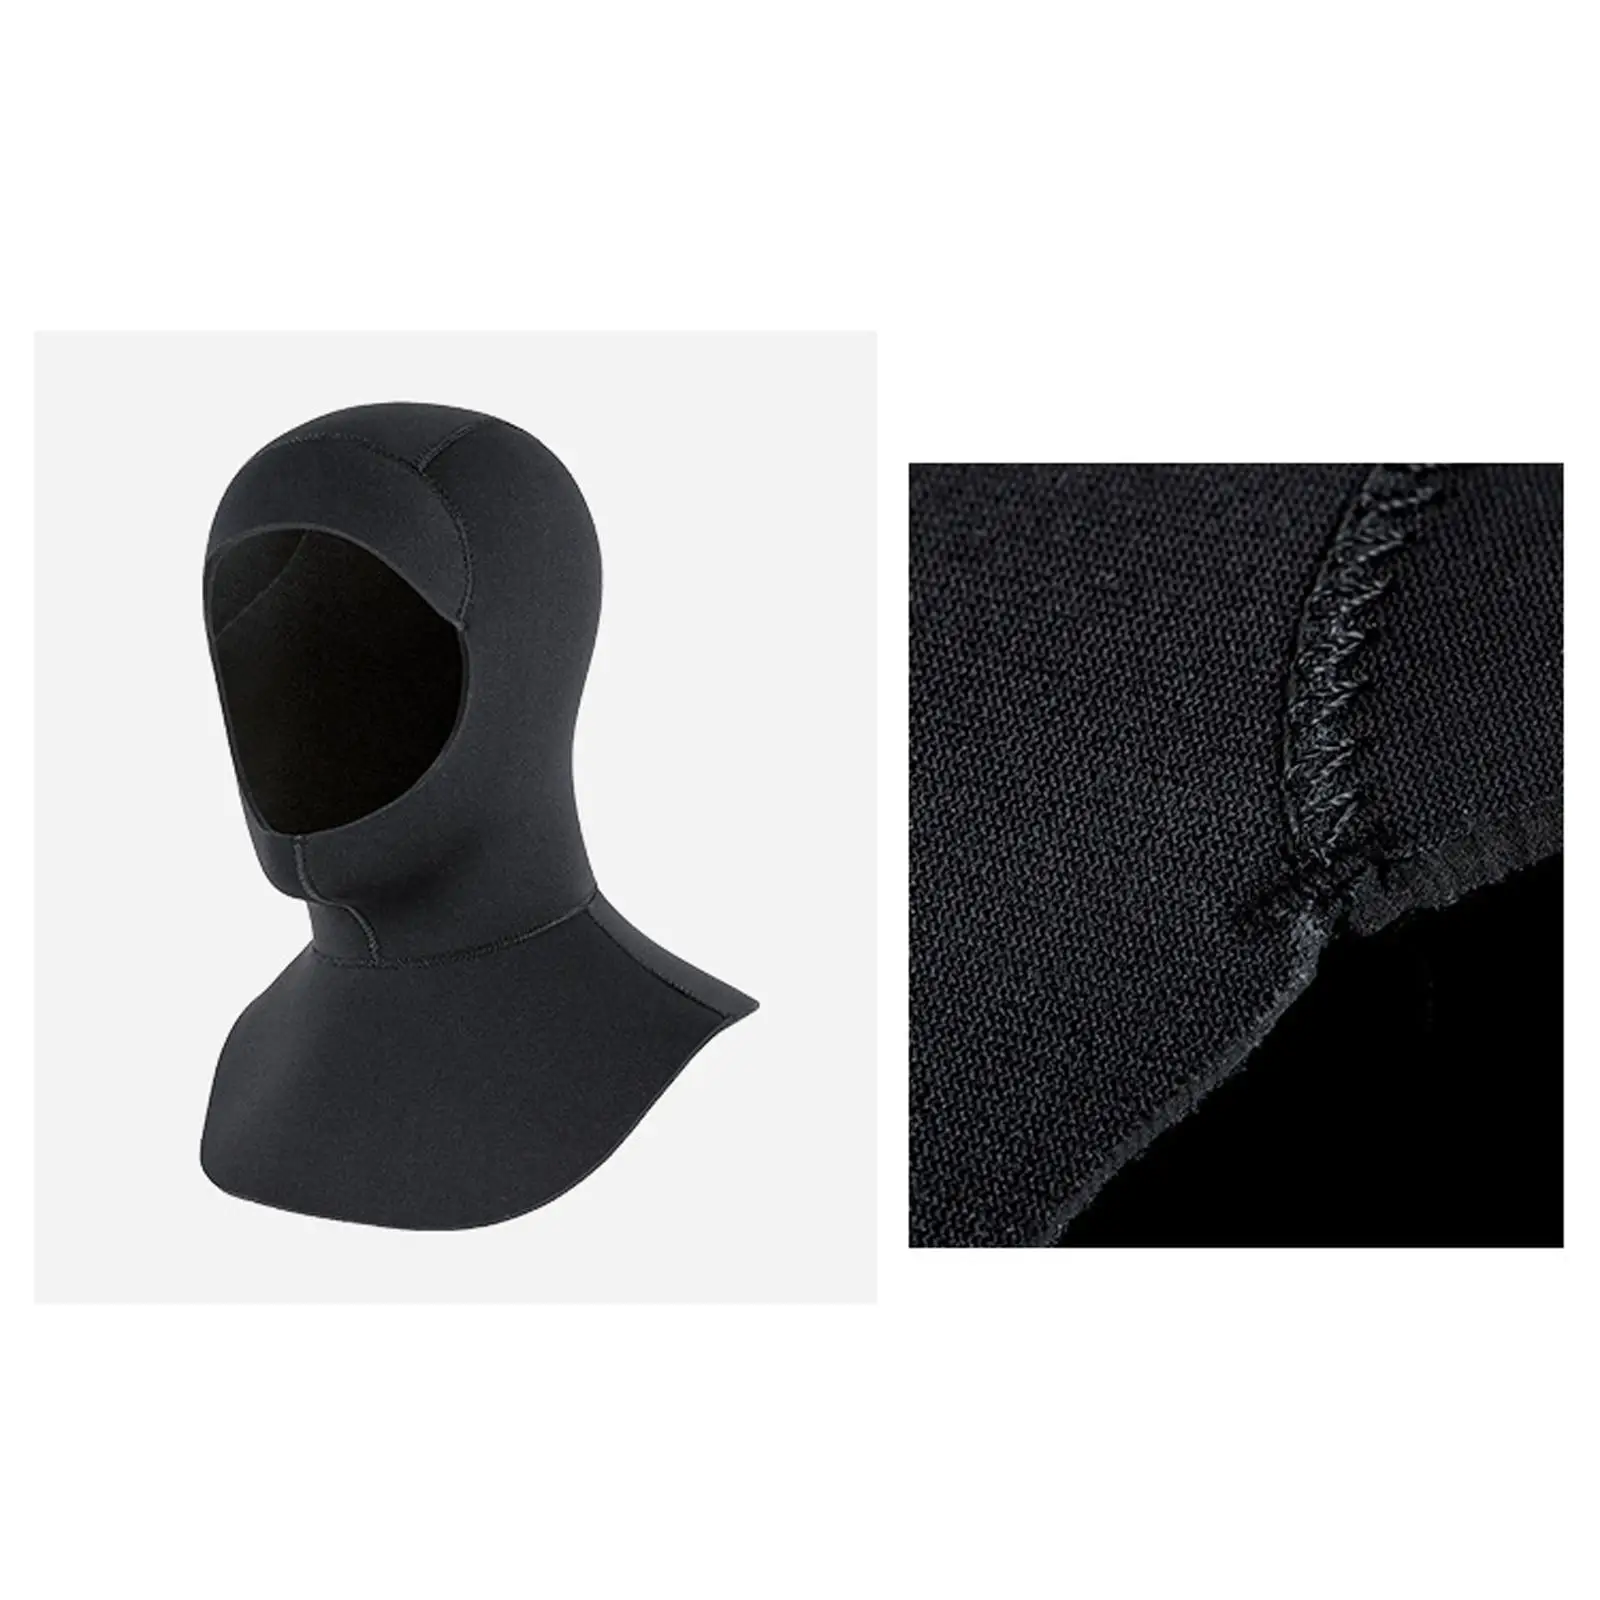 Wetsuit Dive Hood Neoprene Stretchable Head Cover for Sailing Spearfishing Snorkeling